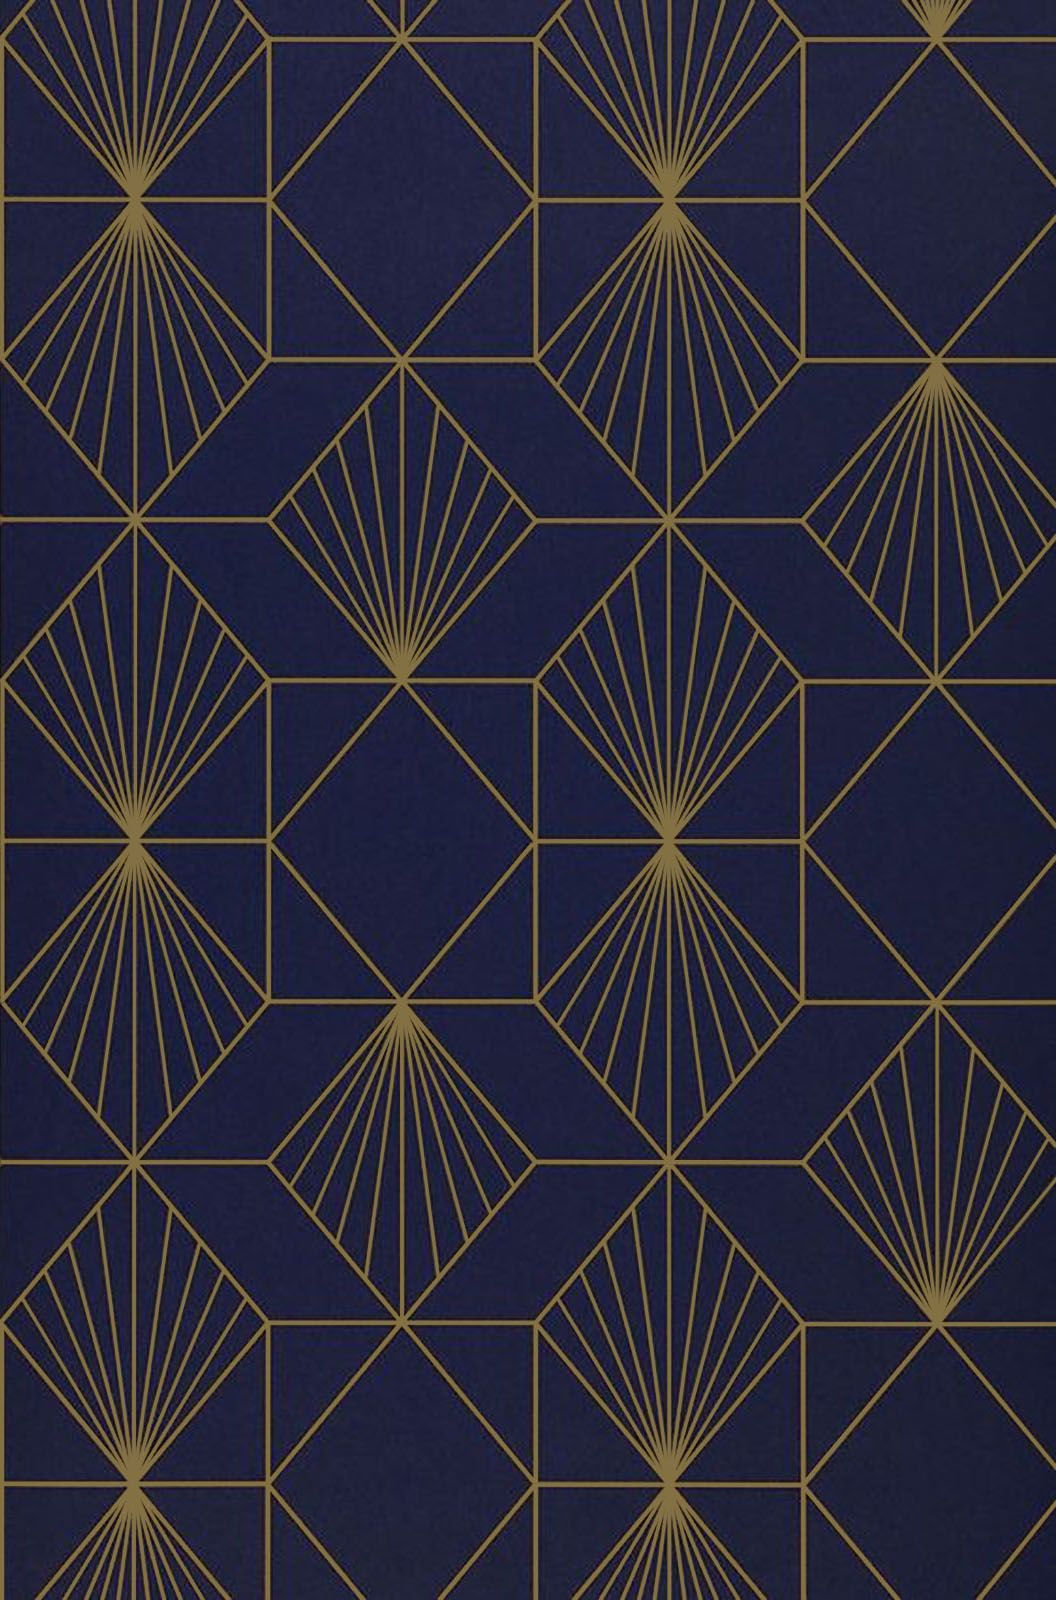 Navy With Rose Gold Would Be Stunning - Geometric Art Deco Patterns , HD Wallpaper & Backgrounds